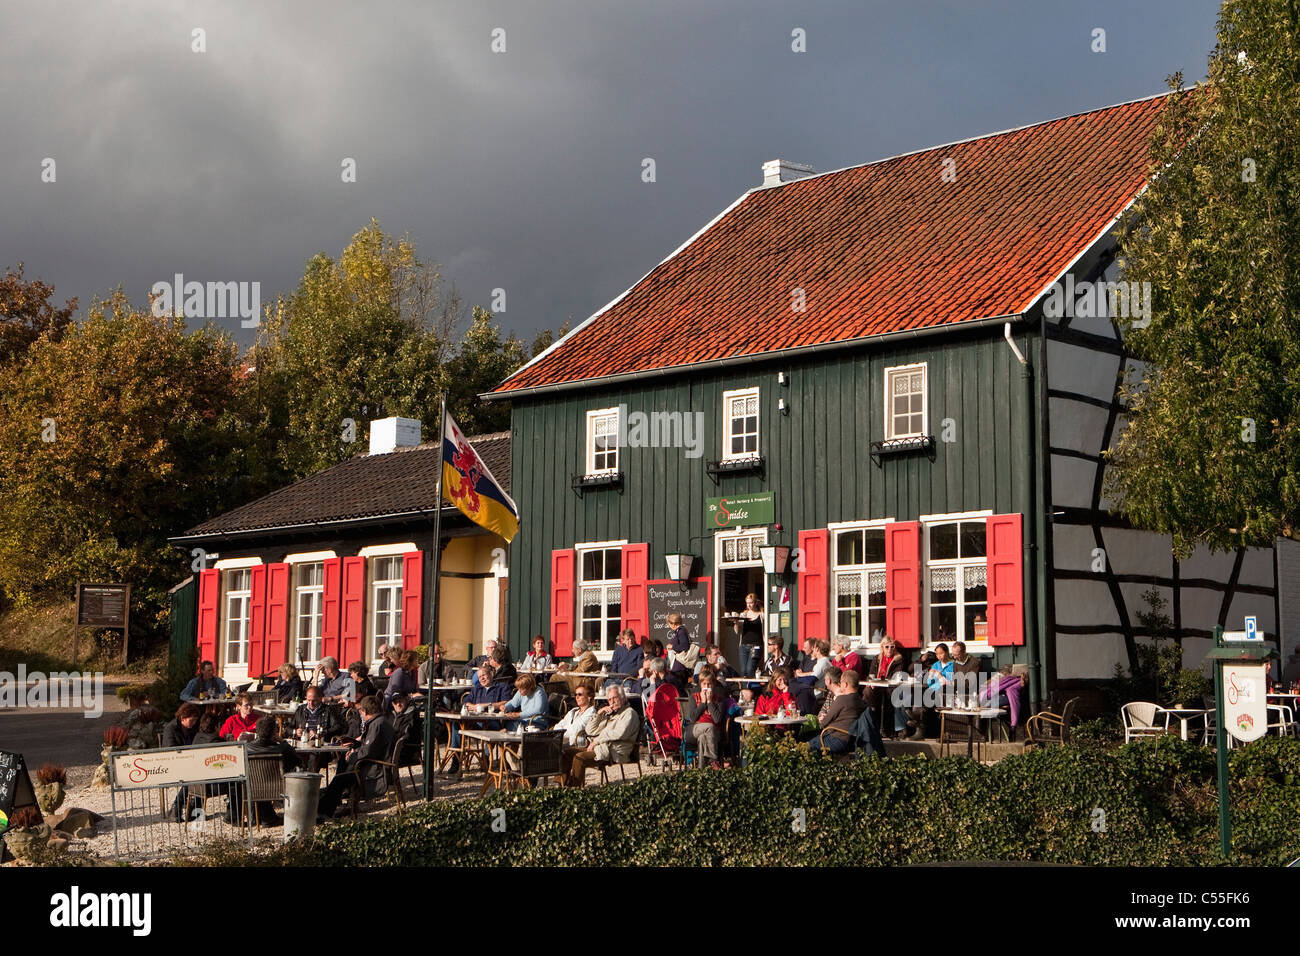 The Netherlands, Epen, Outdoor cafe and hotel called De Herberg Stock Photo